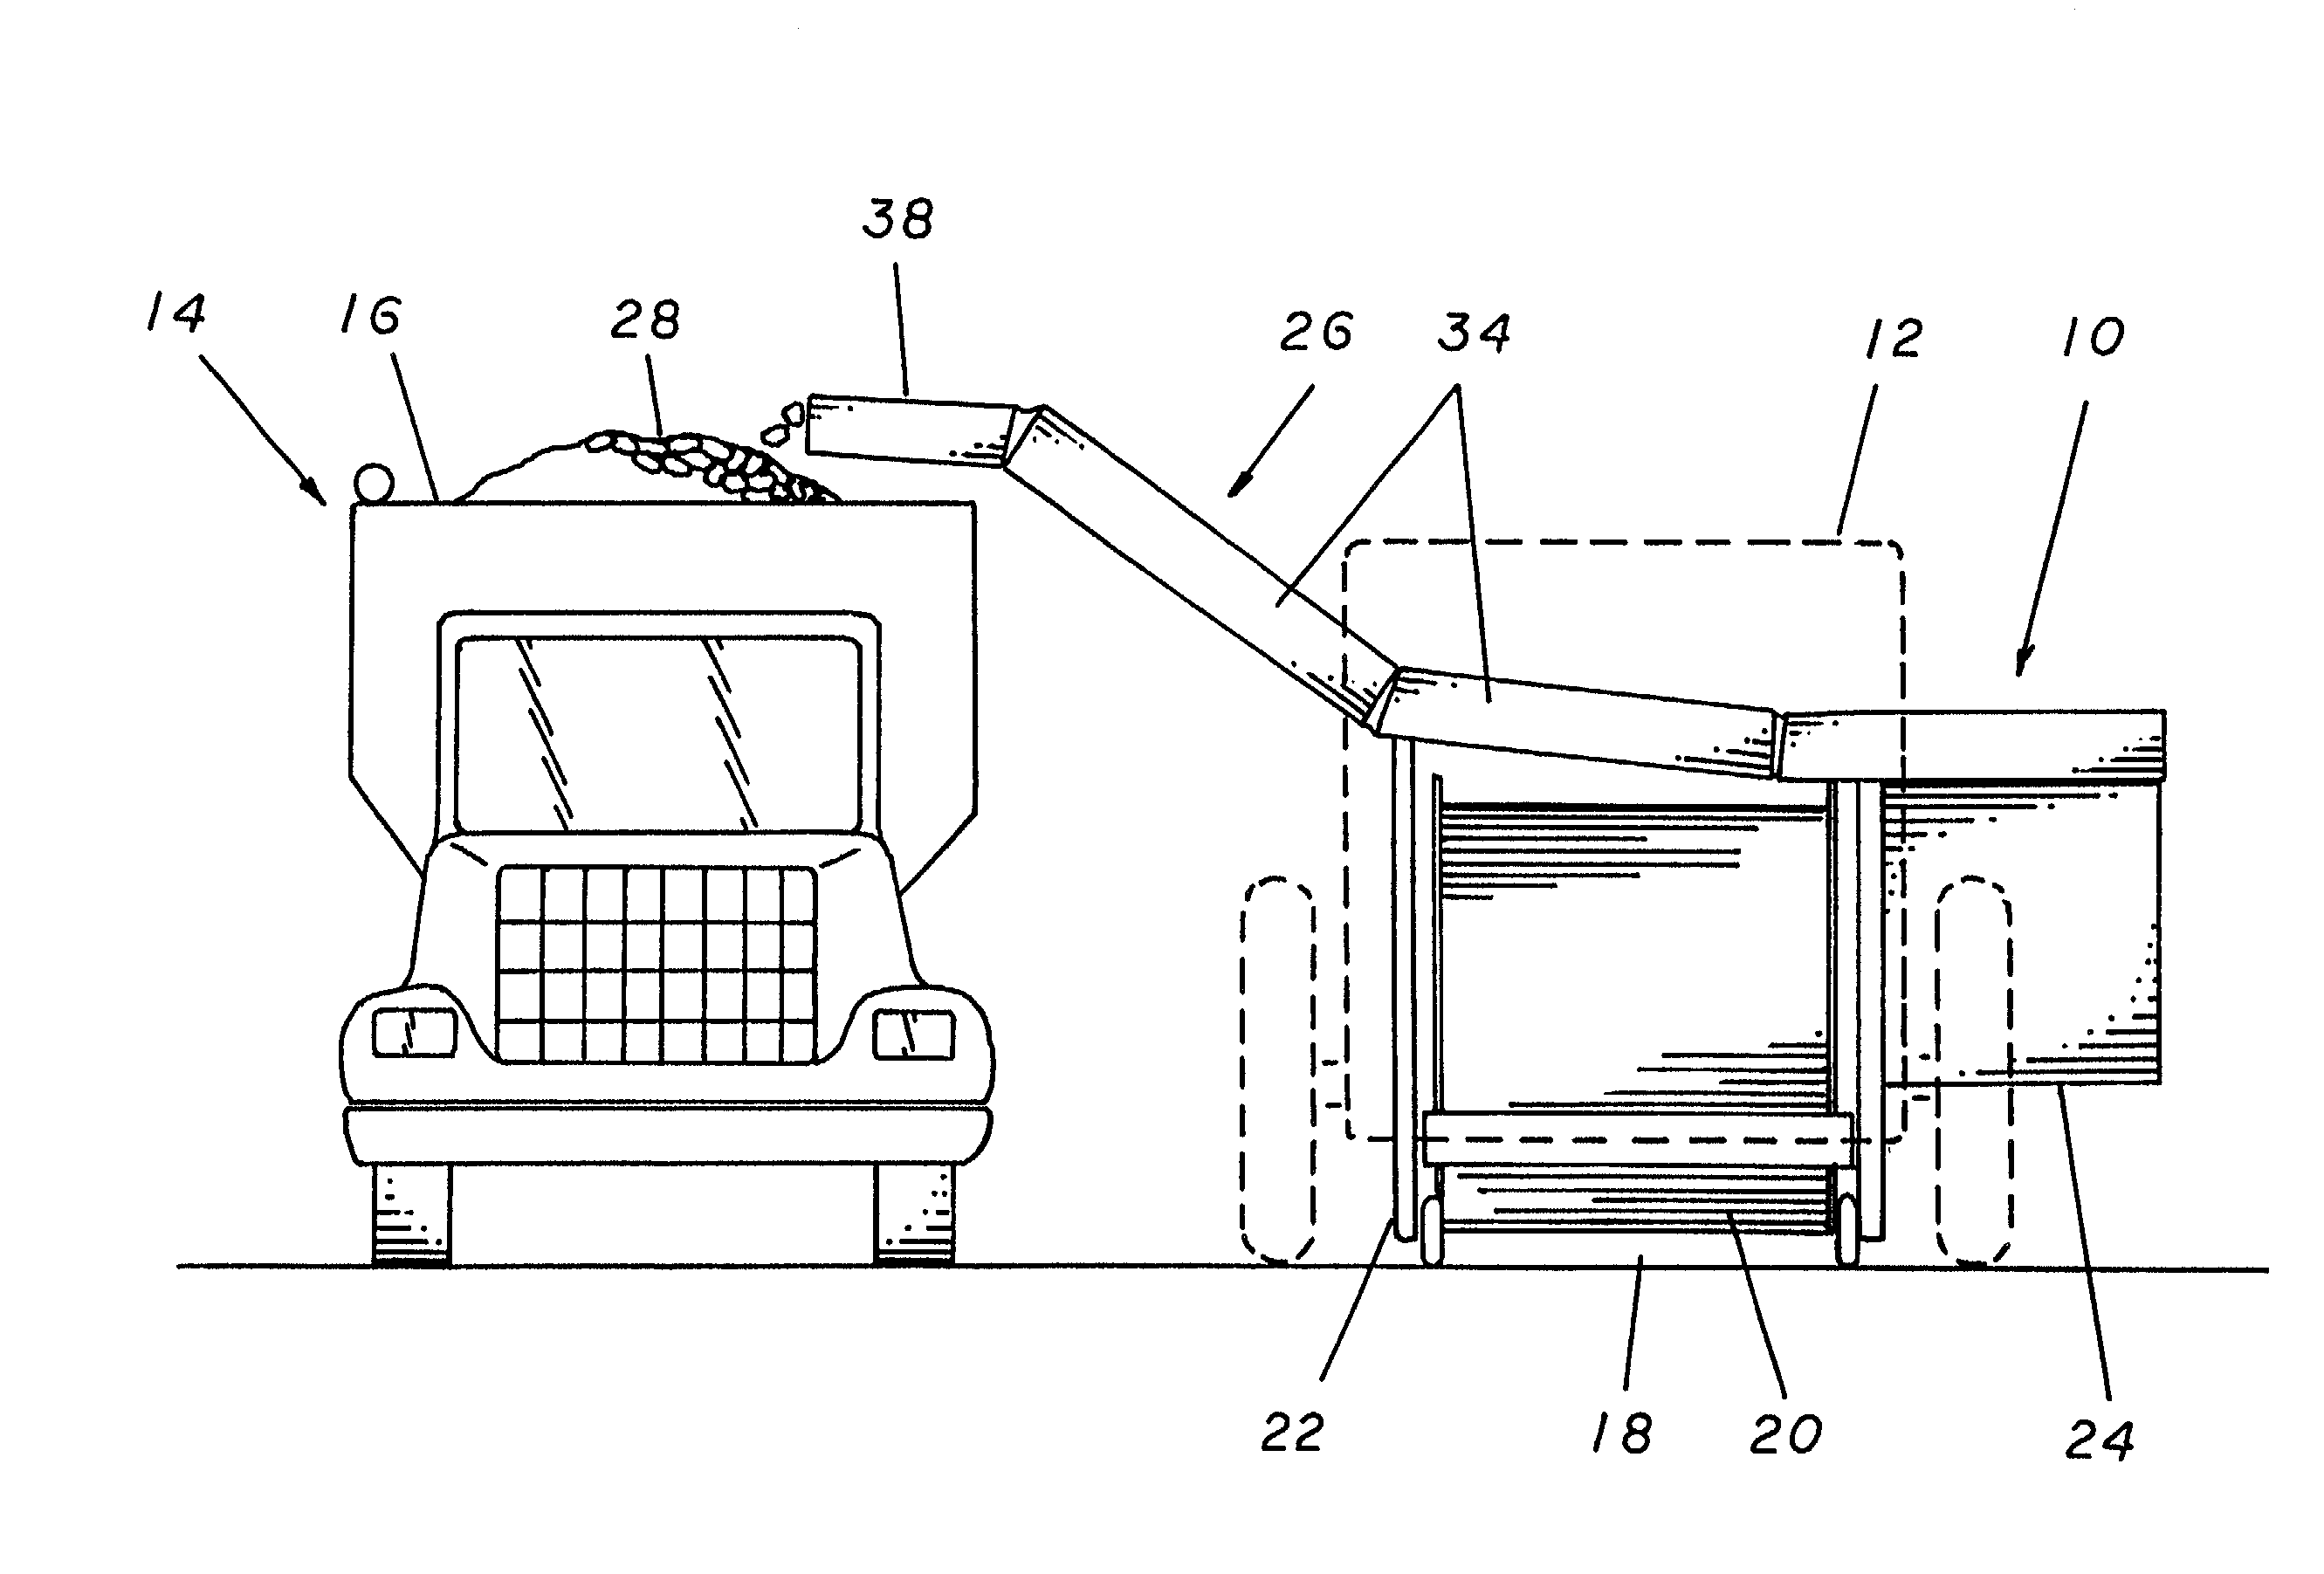 Device used to aid in the loading and unloading of vehicles and implements